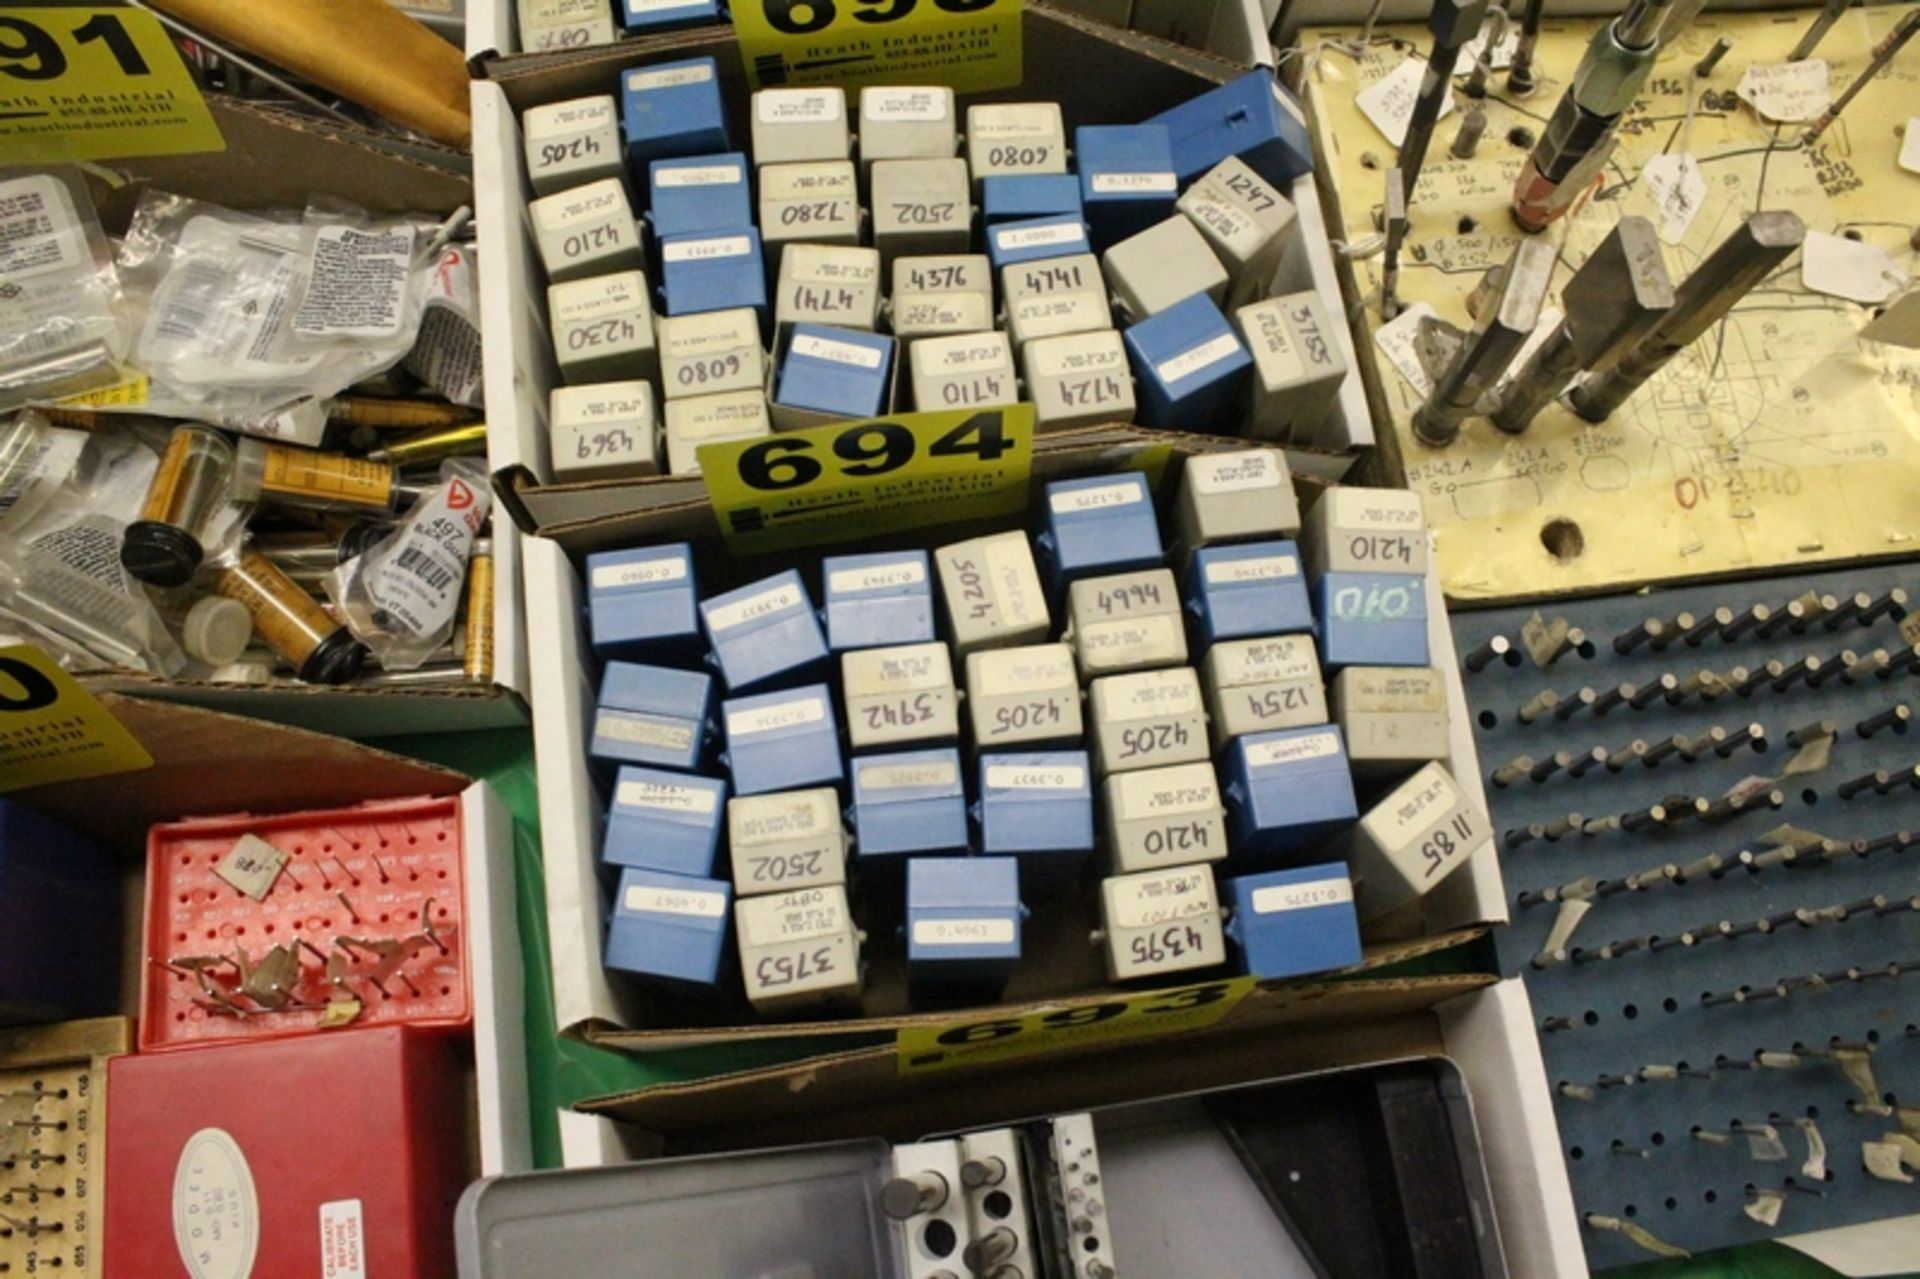 LARGE ASSORTMENT OF VERMONT AND DELTRONIC PLUG GAGES IN BOX